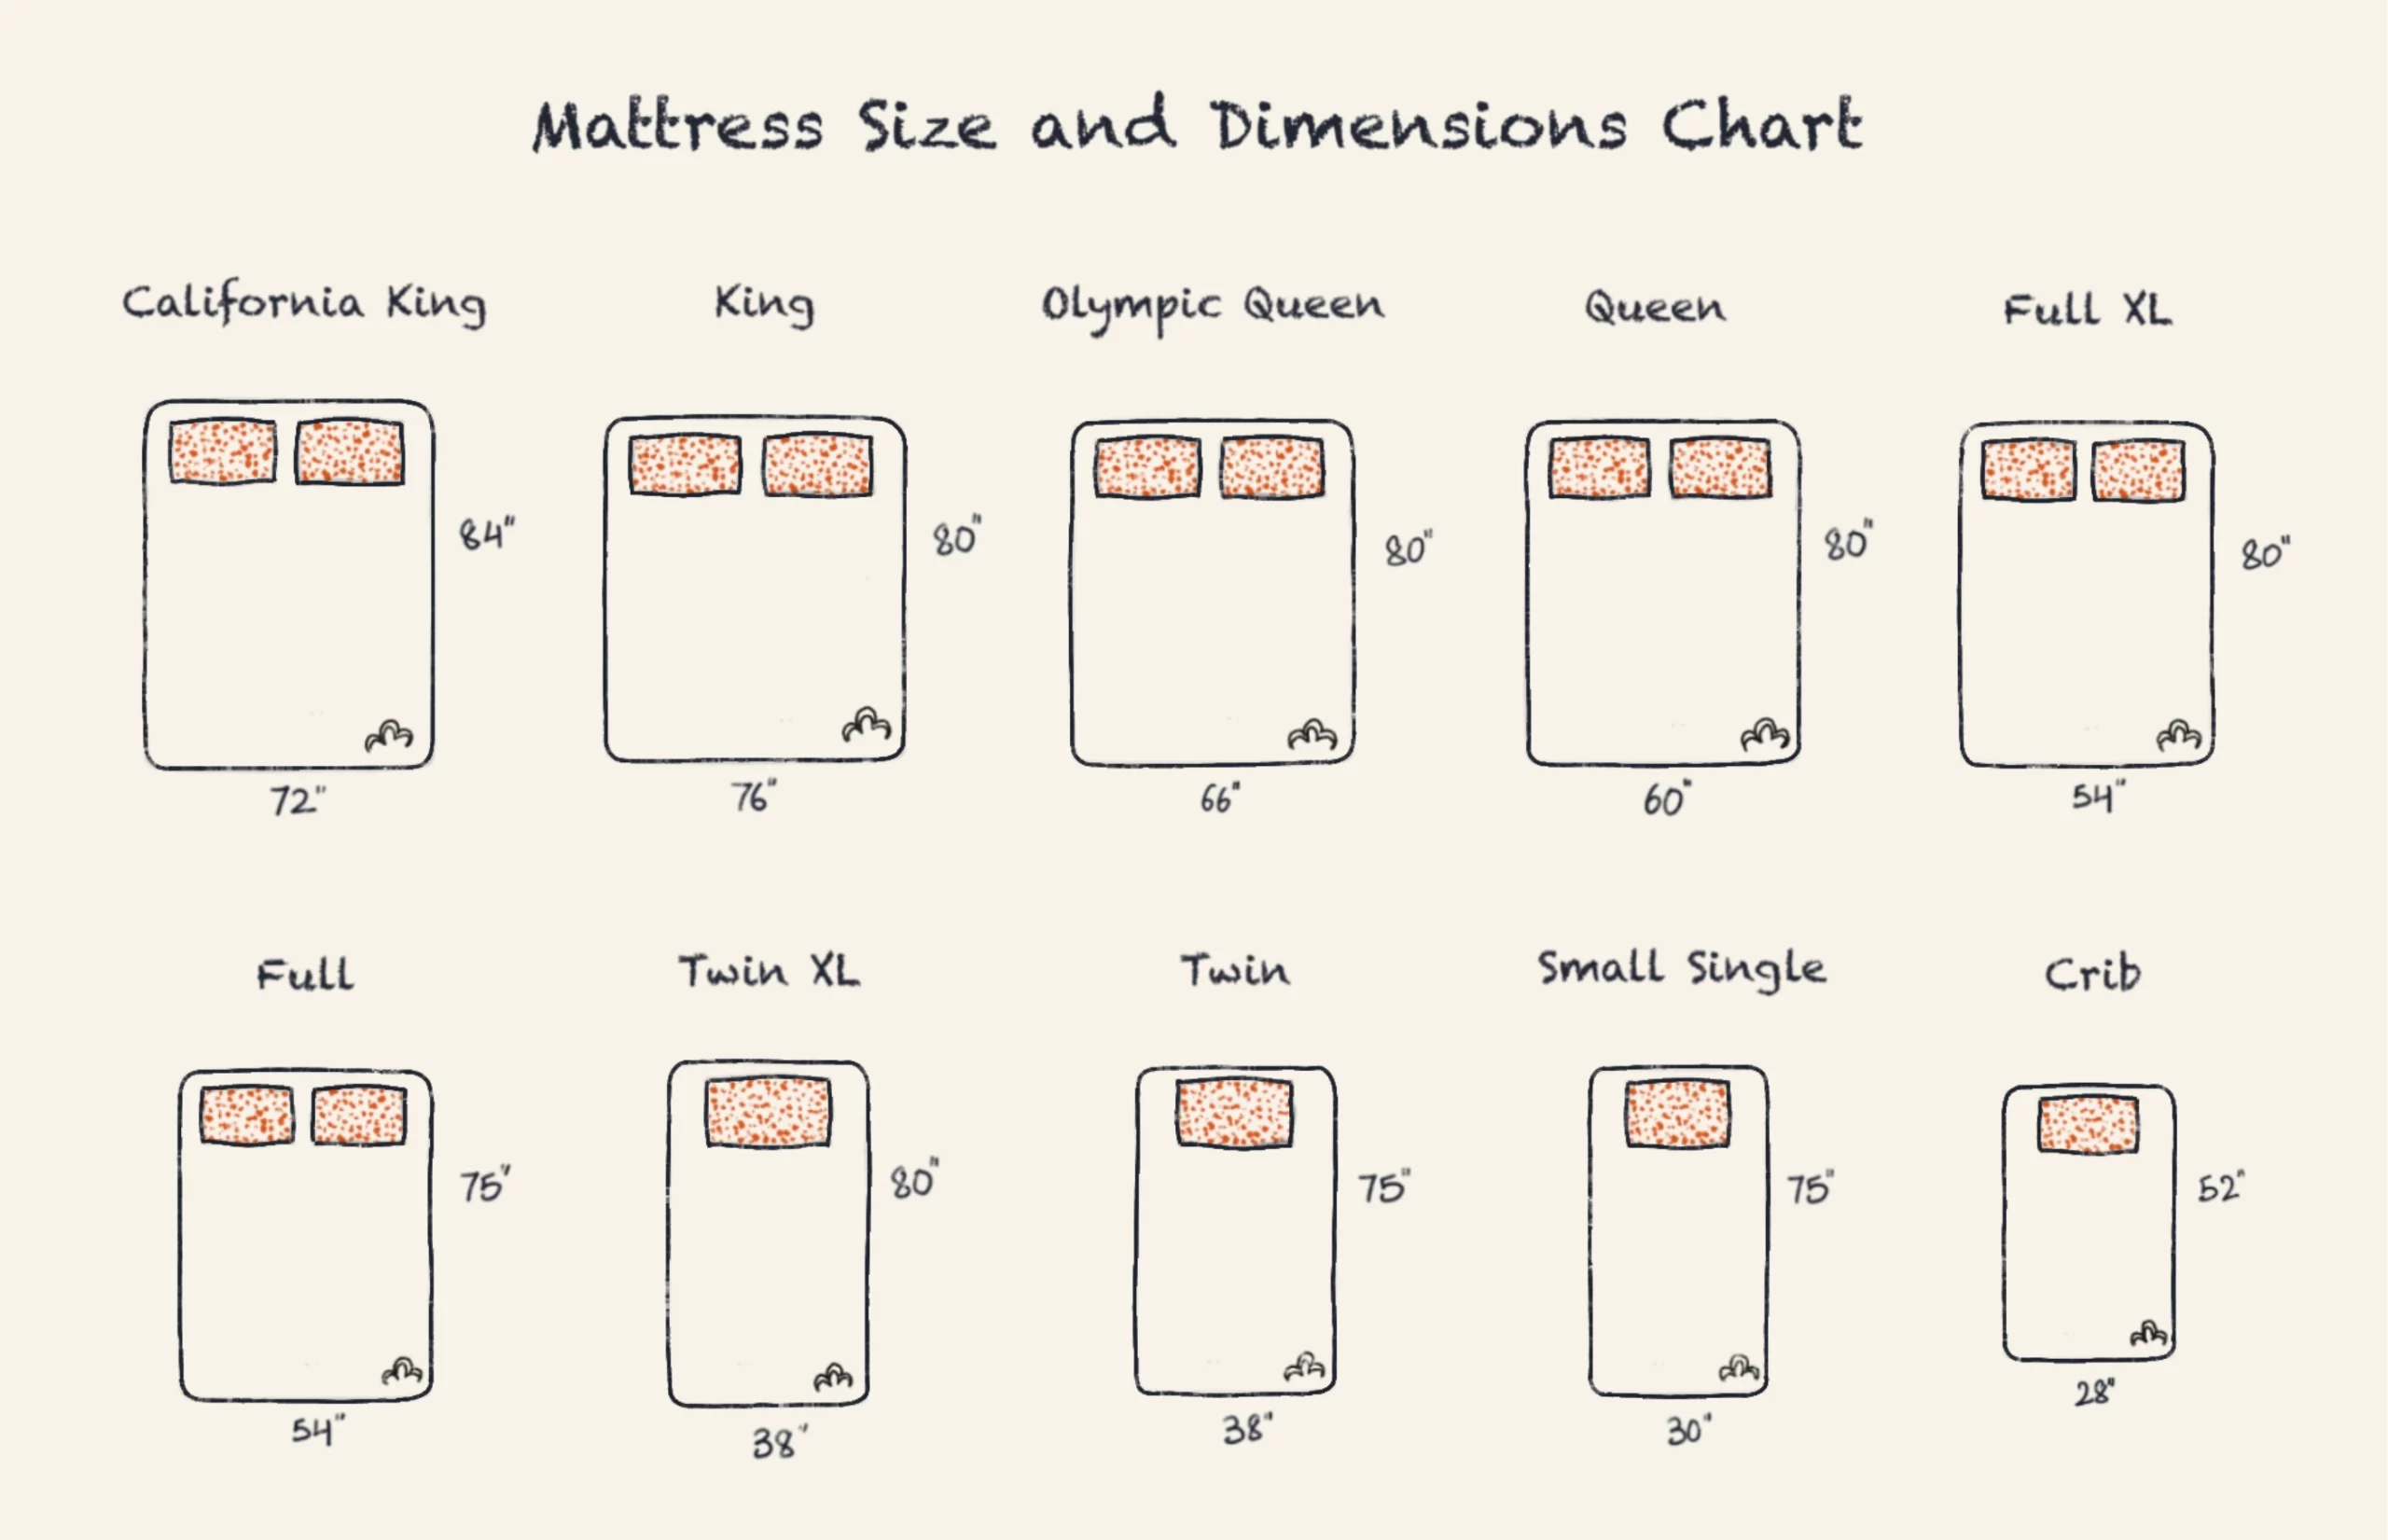 Twin Size Bed Dimensions